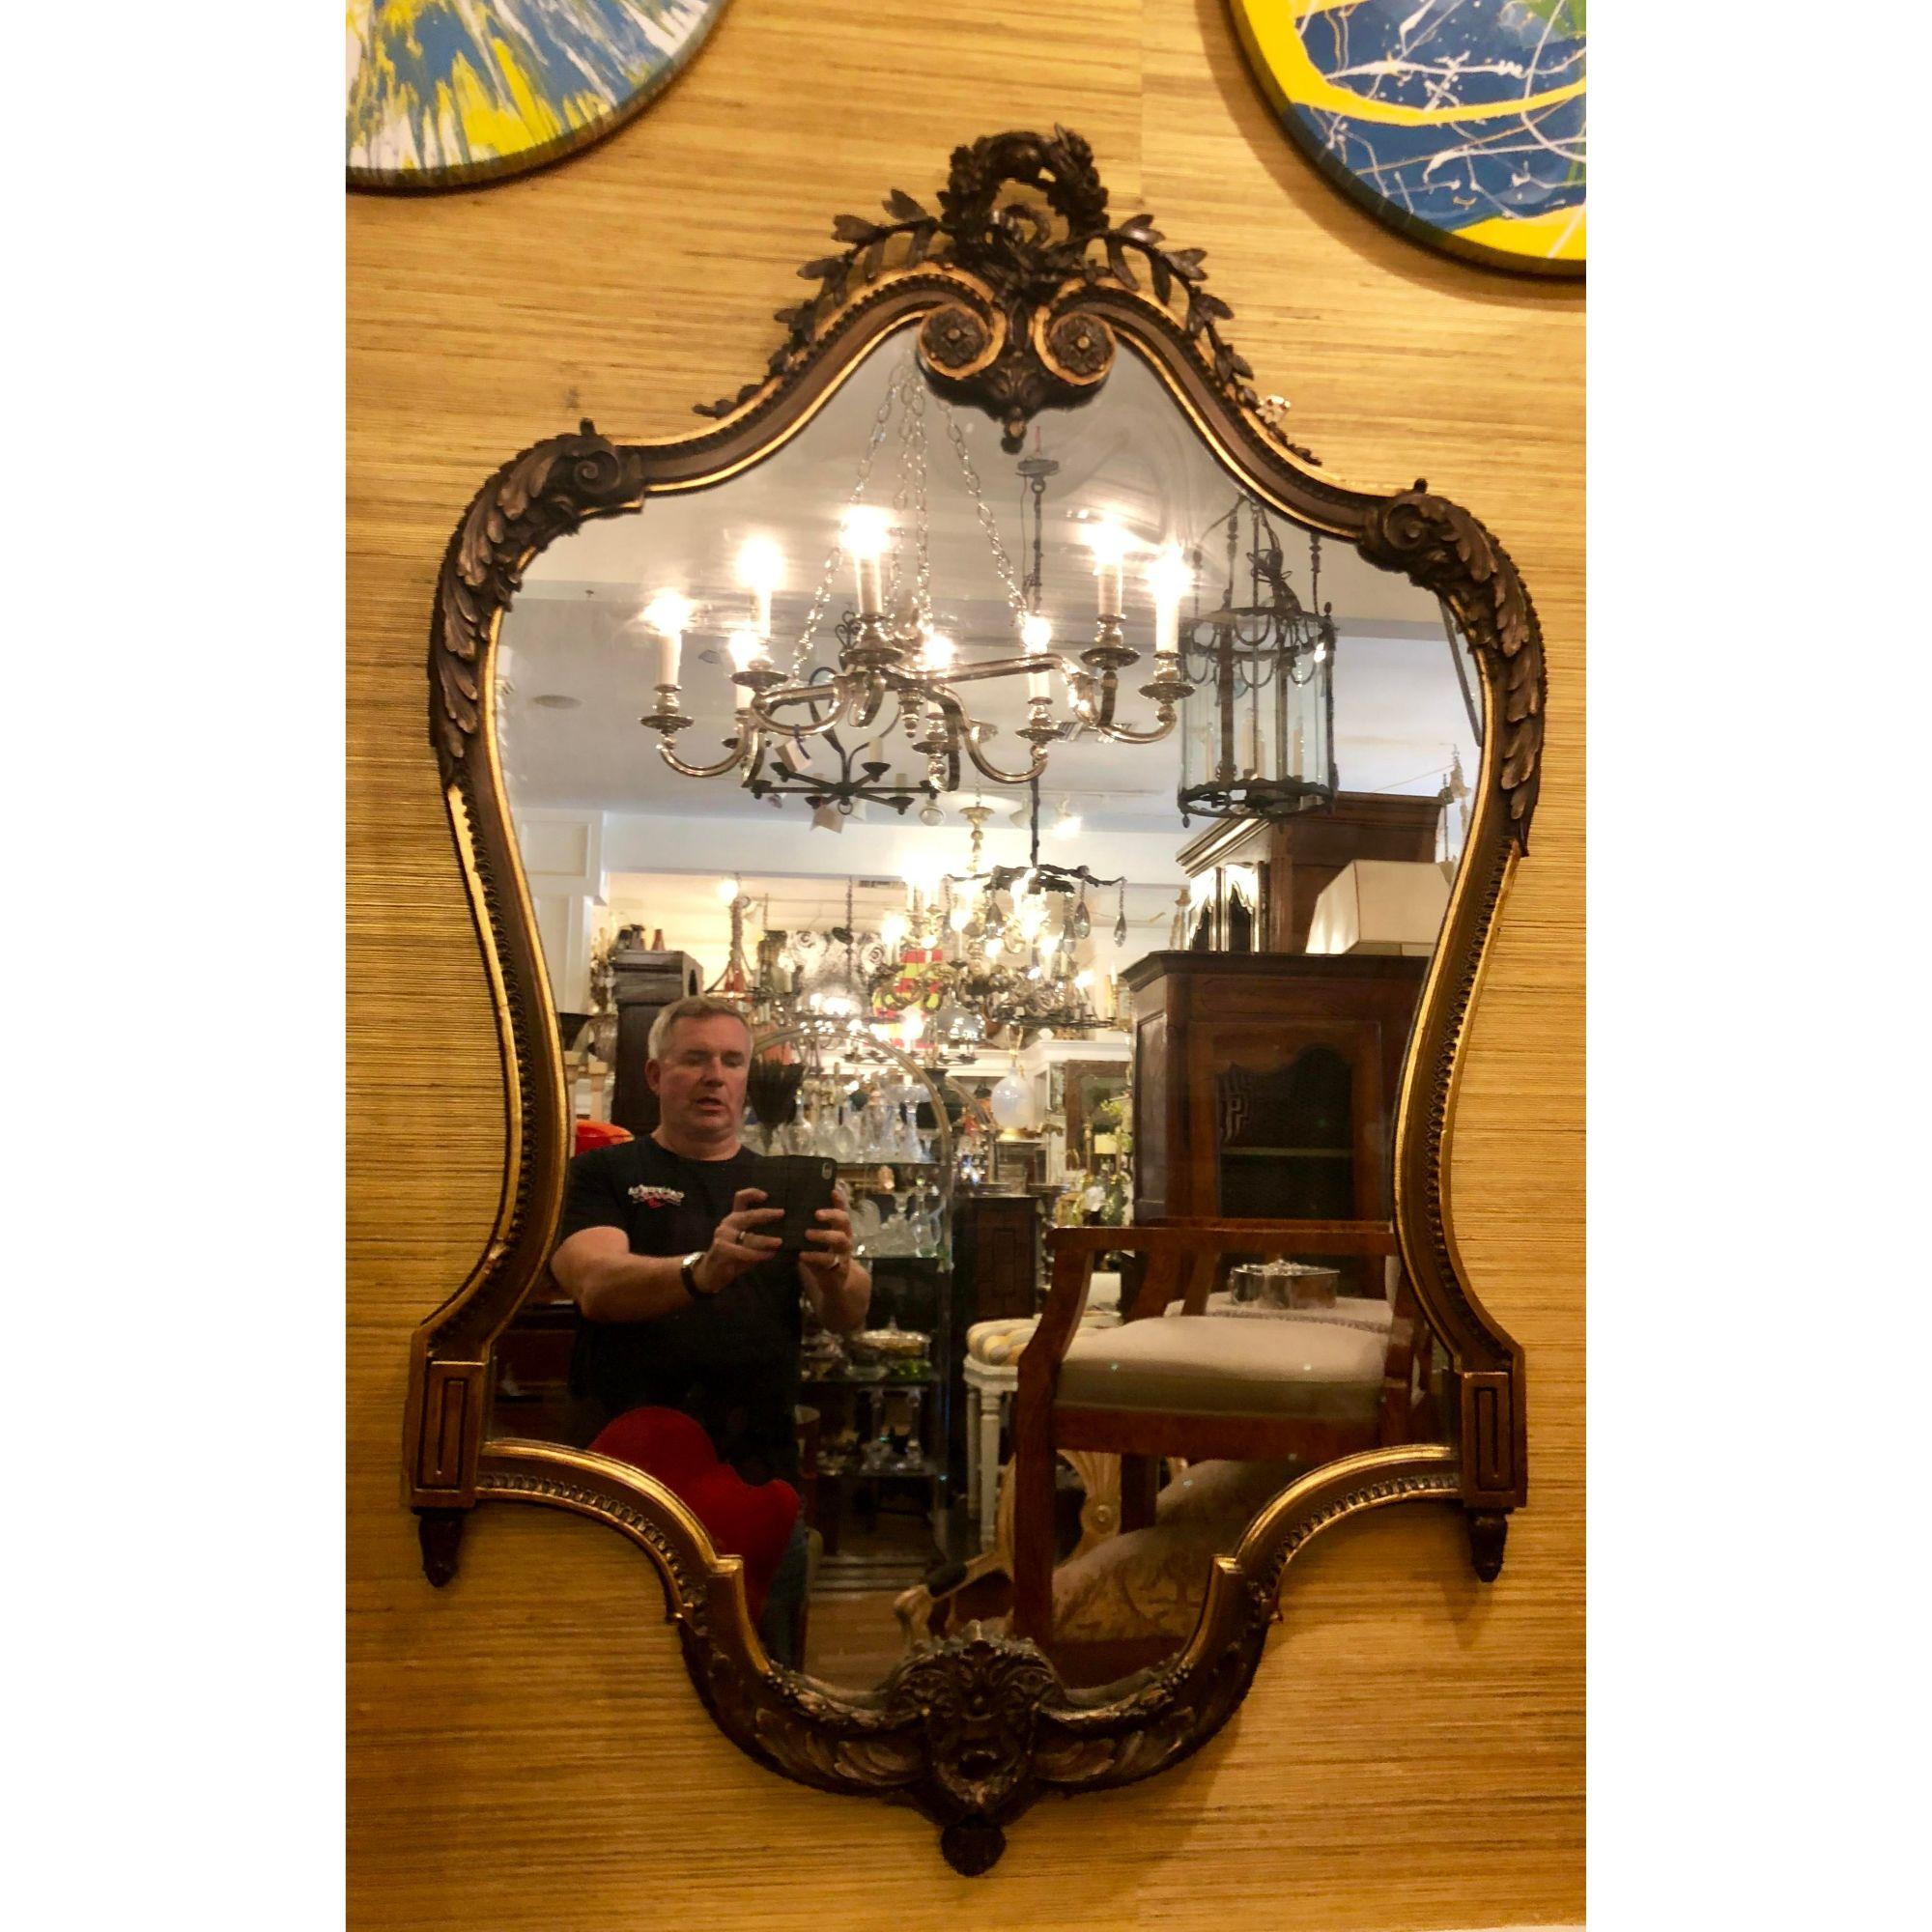 Antique Regency style giltwood mirror

Additional information: 
Materials: Giltwood, Mirror
Color: Gold
Period: 19th century
Place of Origin: England
Styles: Regency
Item Type: Vintage, Antique or Pre-owned
Dimensions: 36